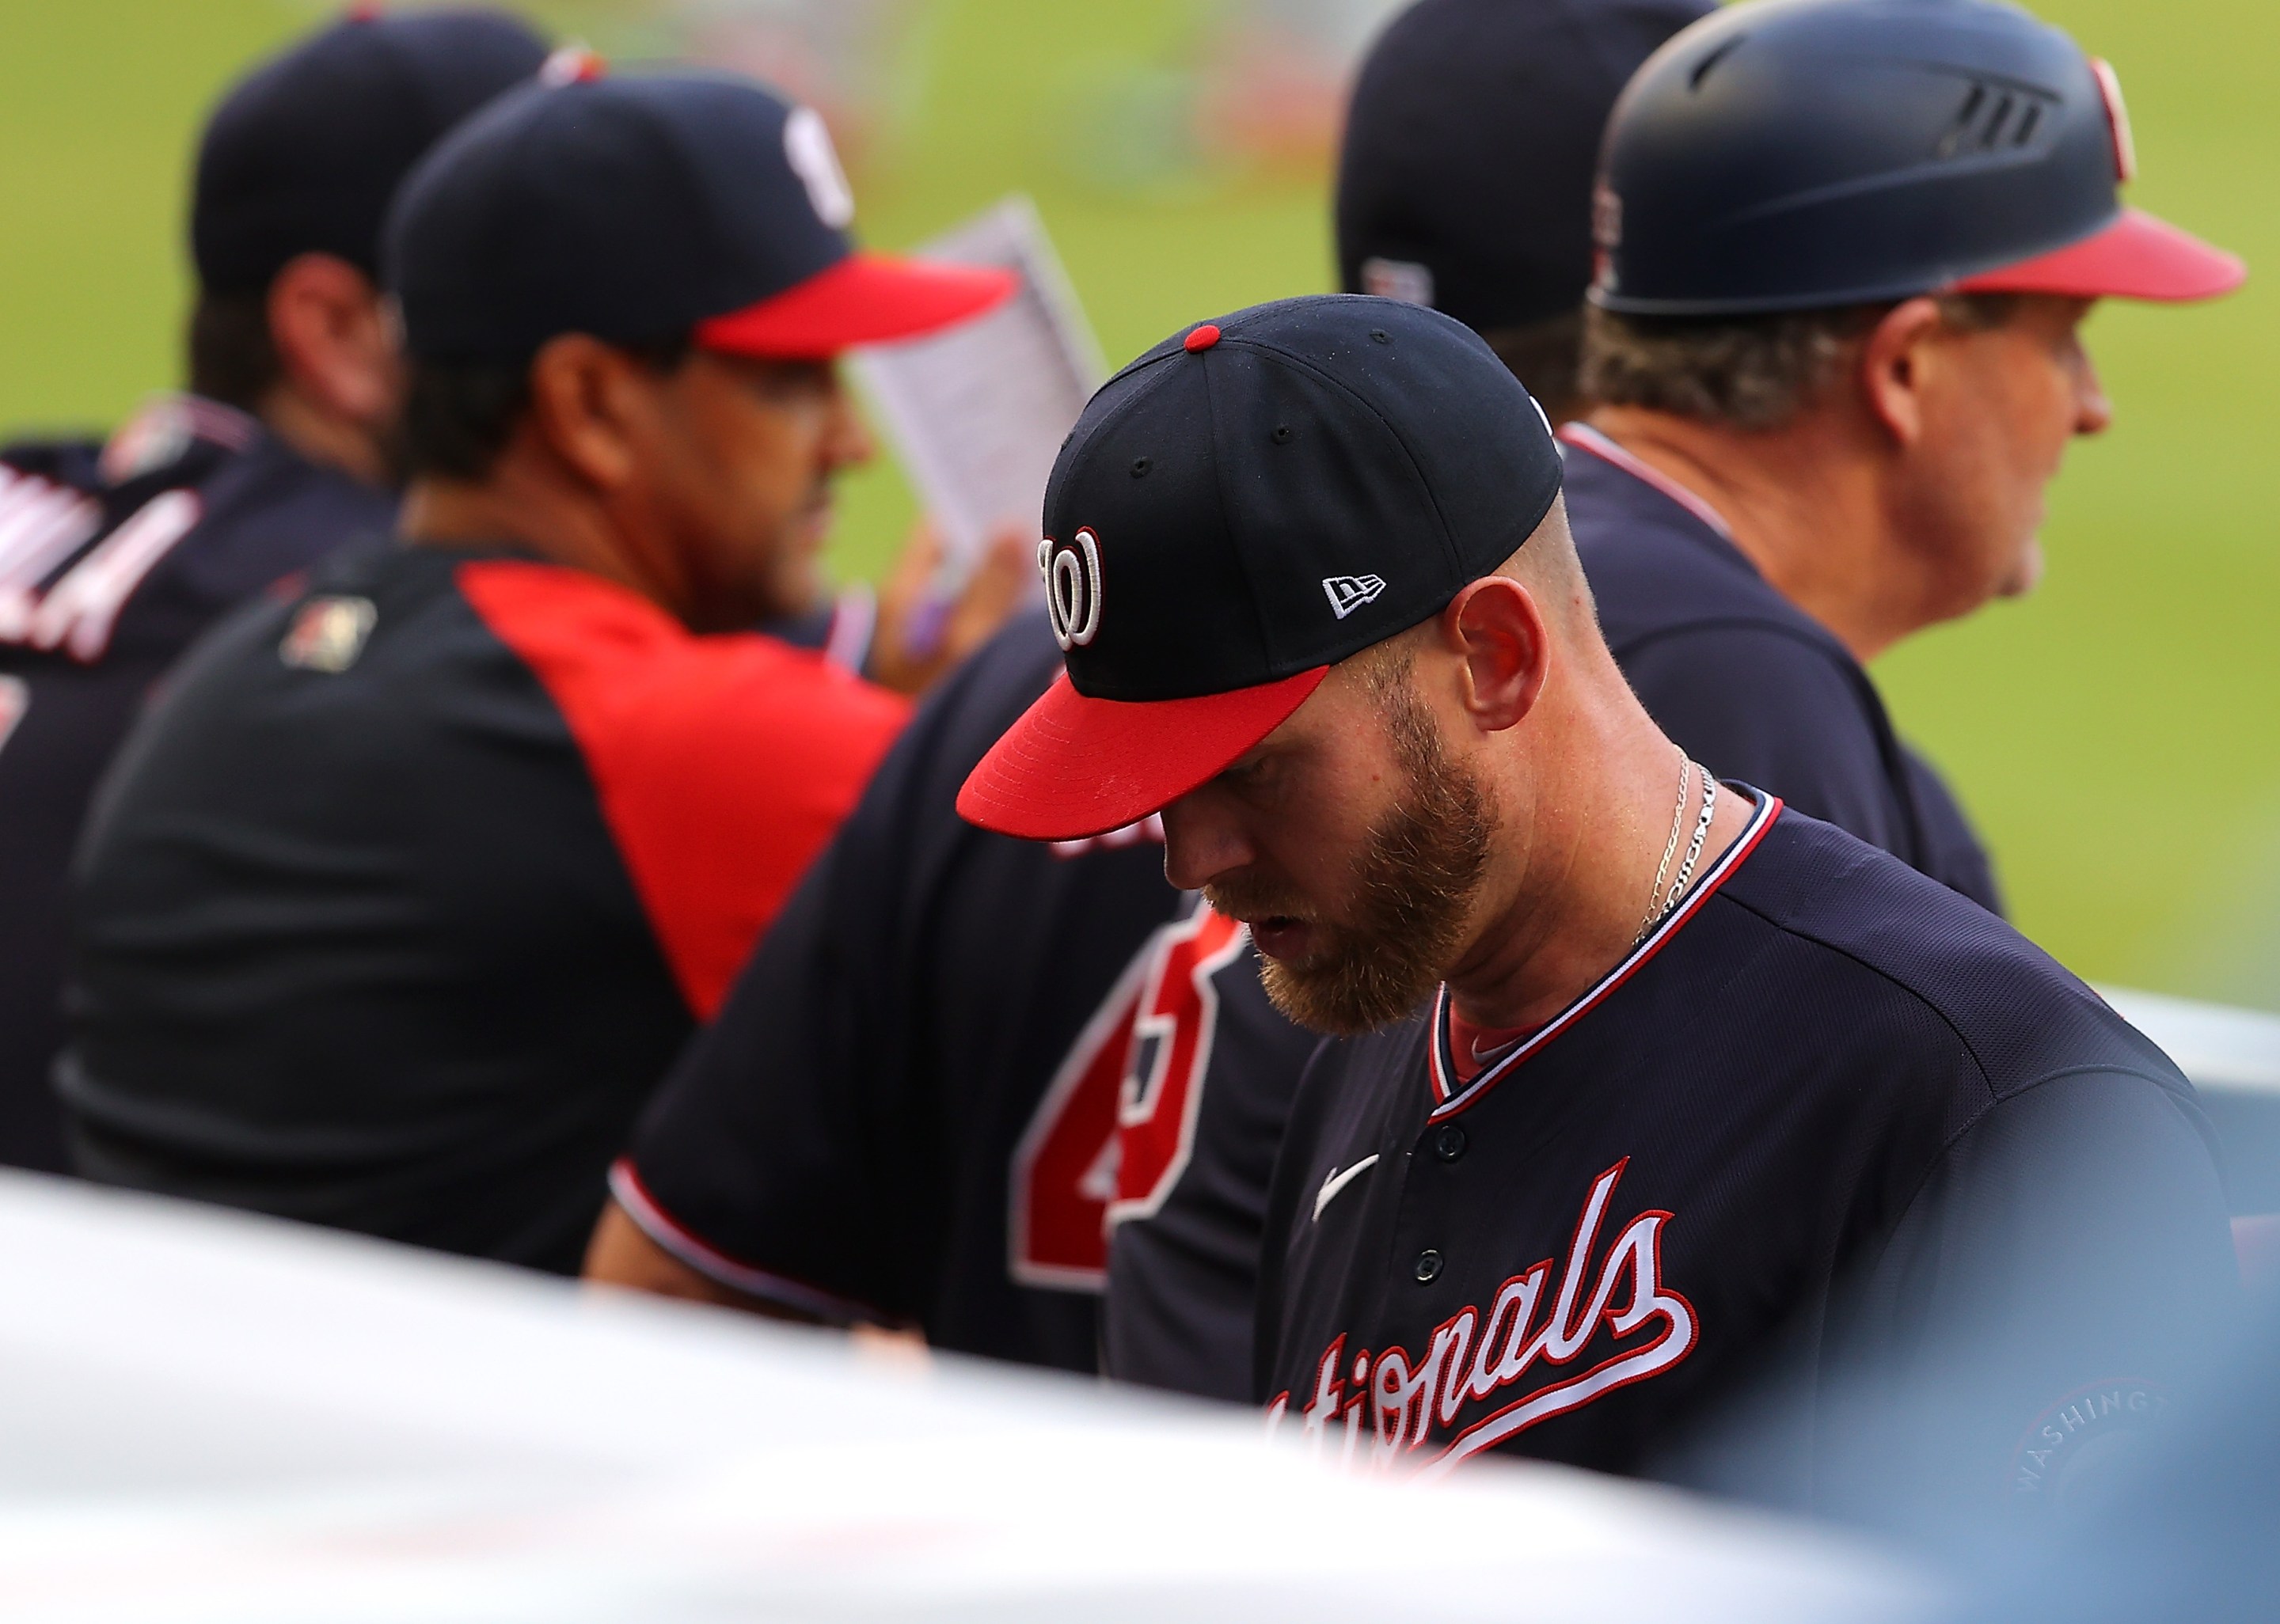 Stephen Strasburg looks bummed as he leaves the field following another injury.